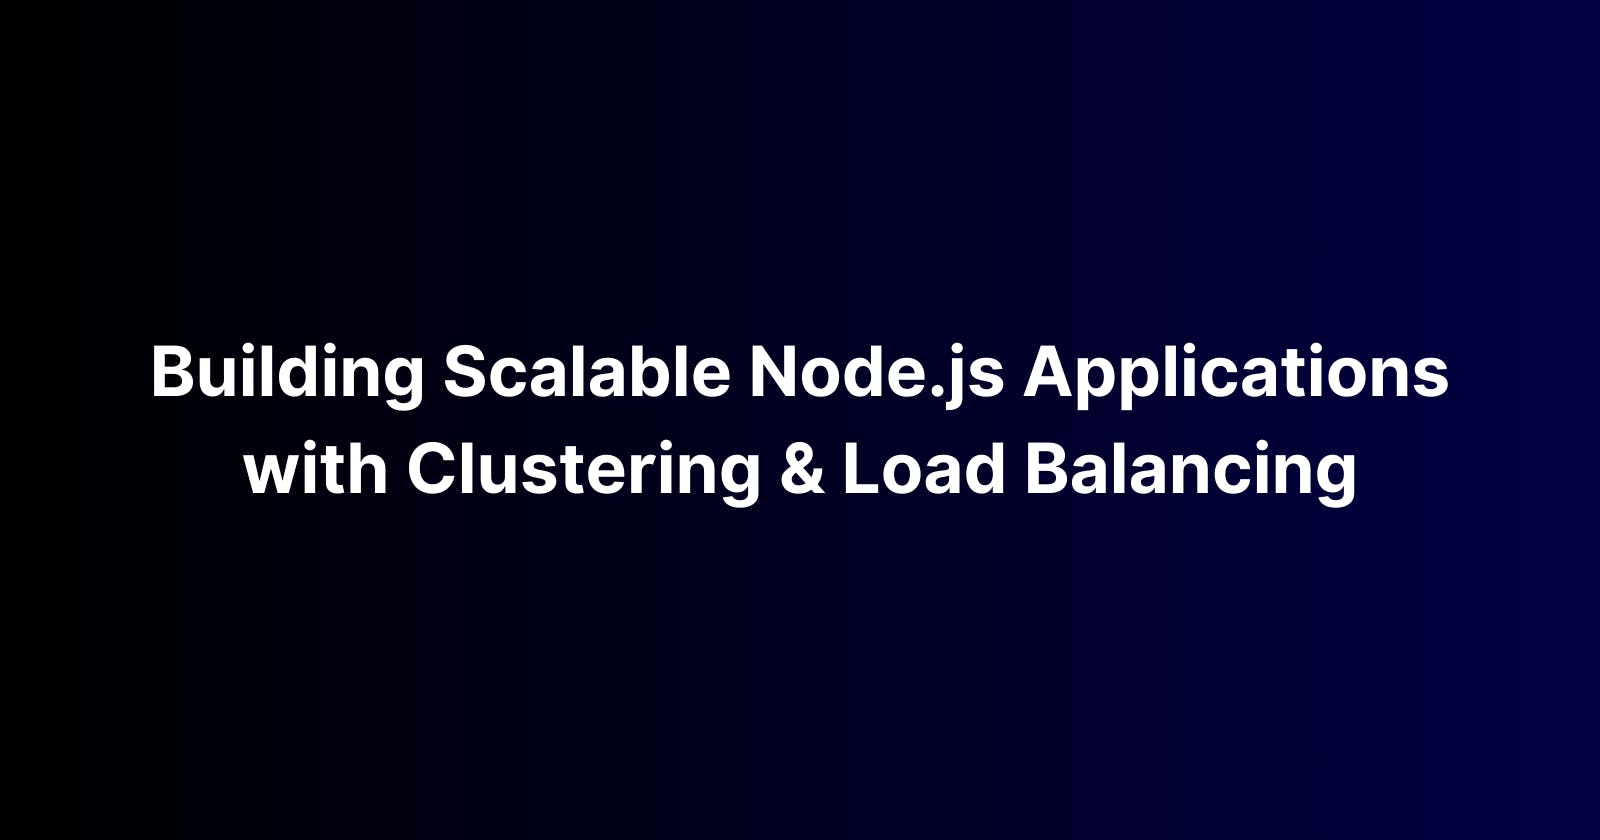 Building Scalable Node.js Applications with Clustering and Load Balancing